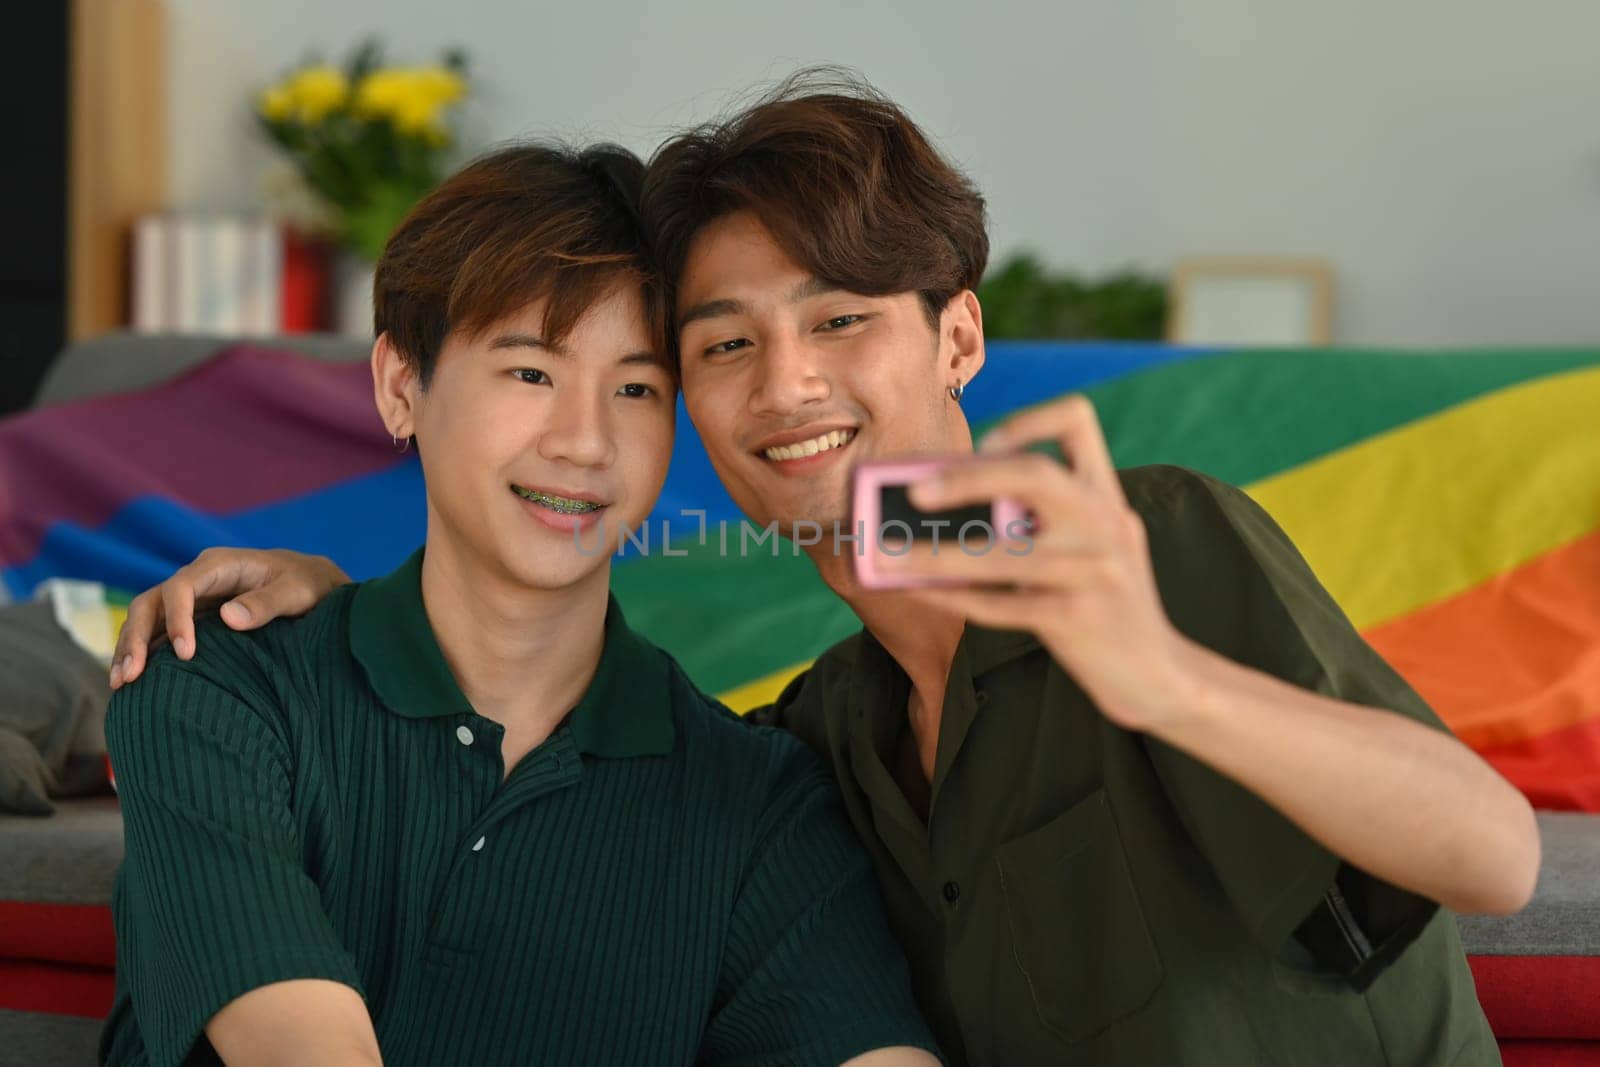 Joyful gay couple taking a selfie with compact camera in living room rainbow flag in background. LGBT, love and human rights concept by prathanchorruangsak